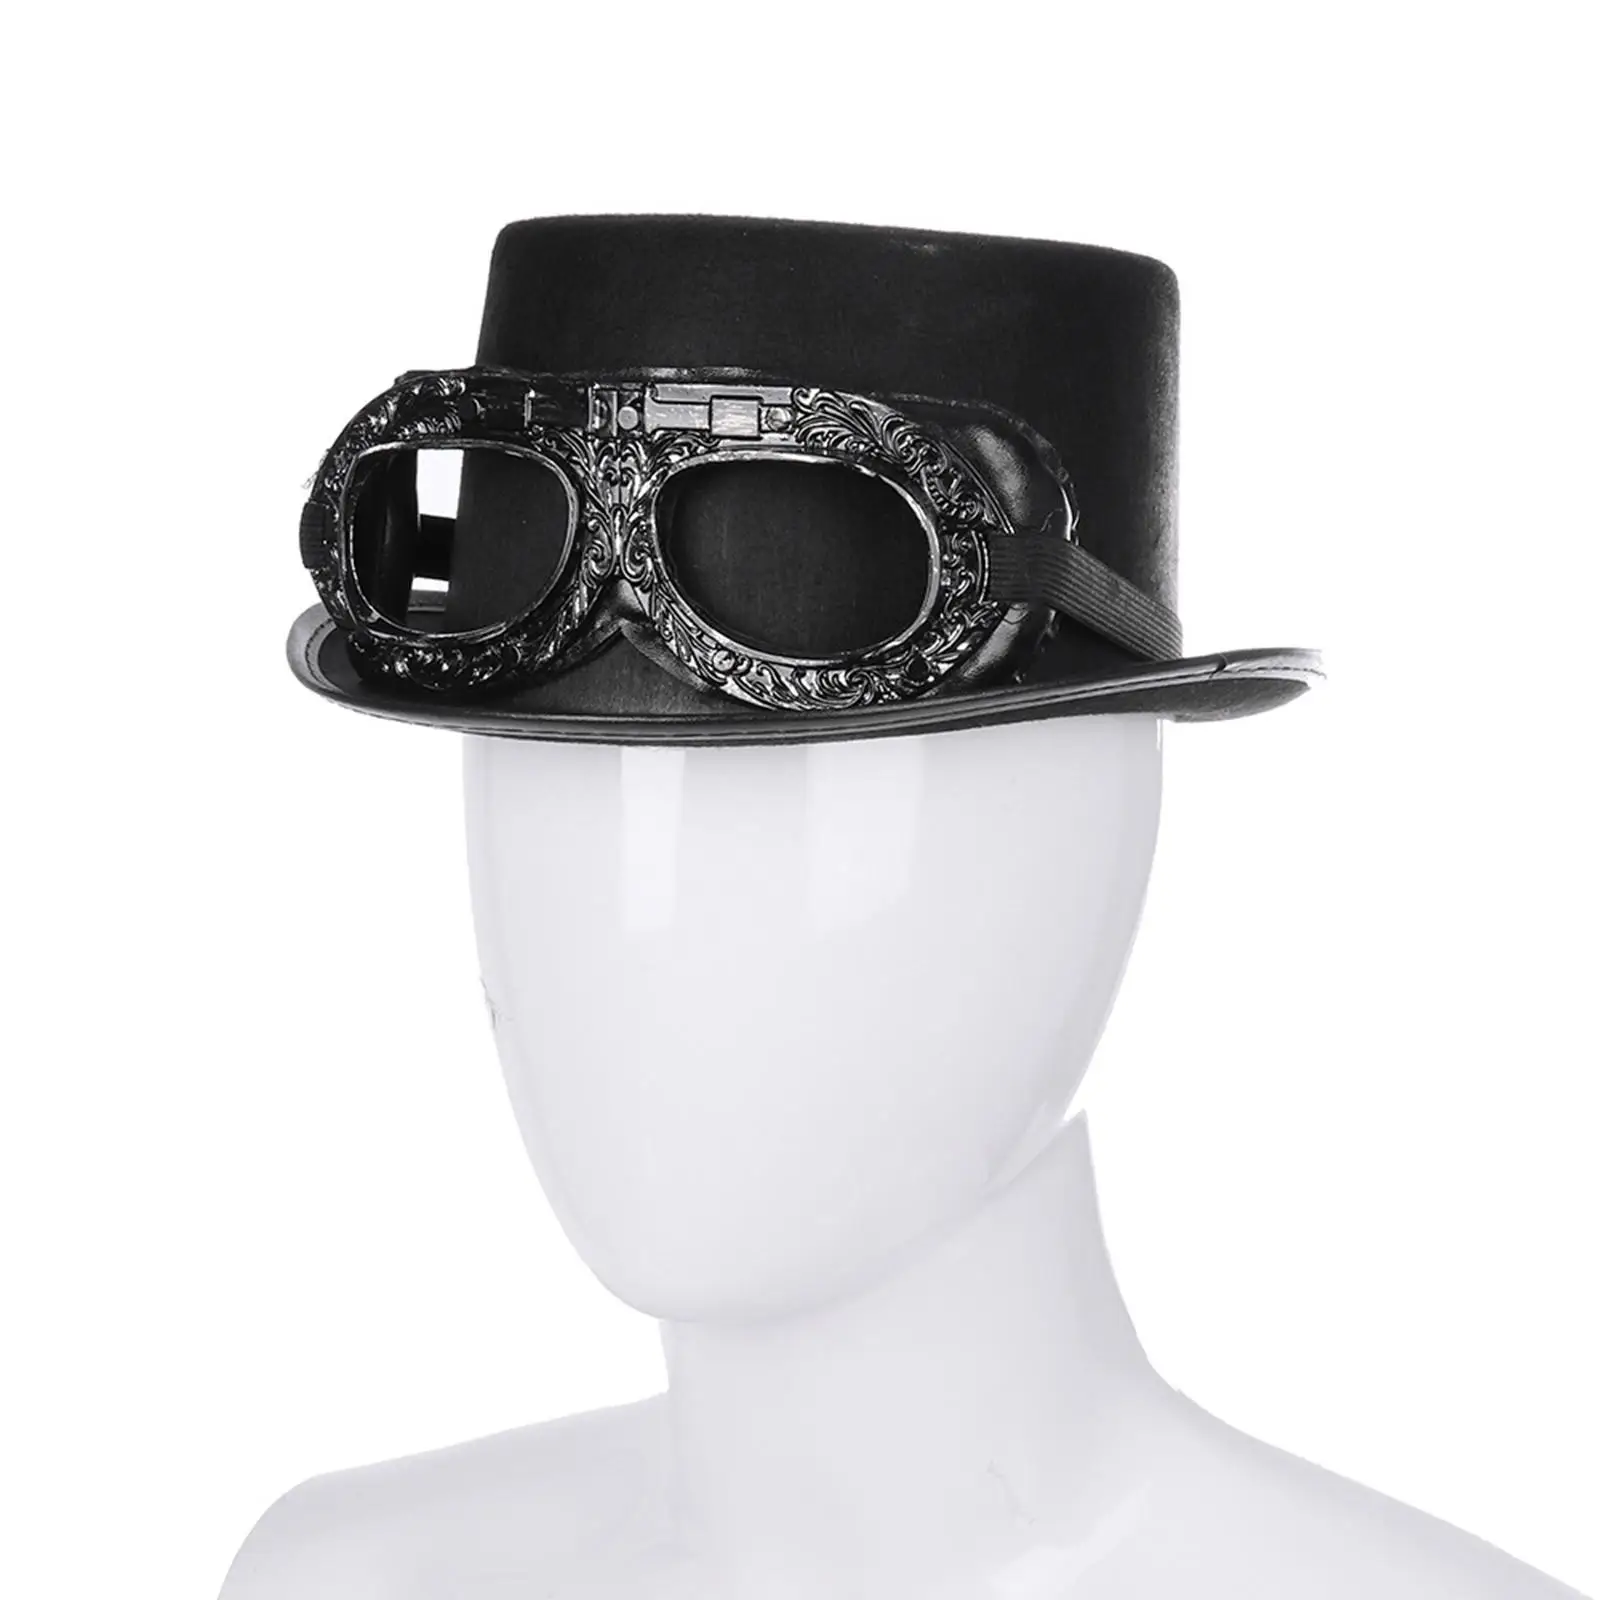 Deluxe Steampunk Top Hat with Goggles Vintage Style Formal Novelty Costume Hat Punk Gear for Unisex Halloween Costume Accessory